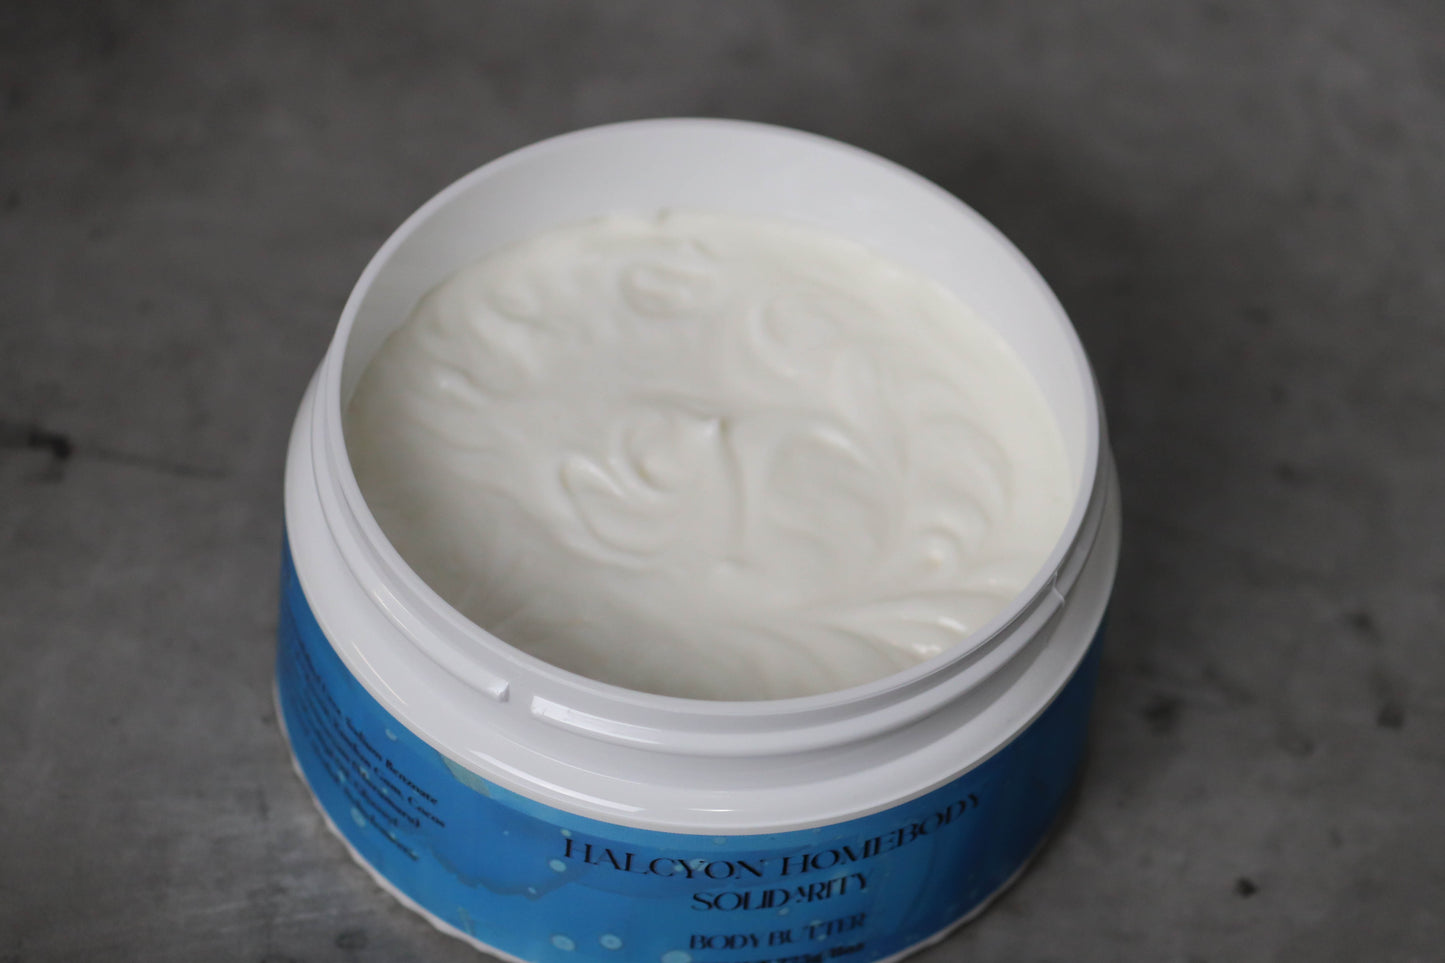 Solidarity Whipped Body Soufflé (Body Butter)